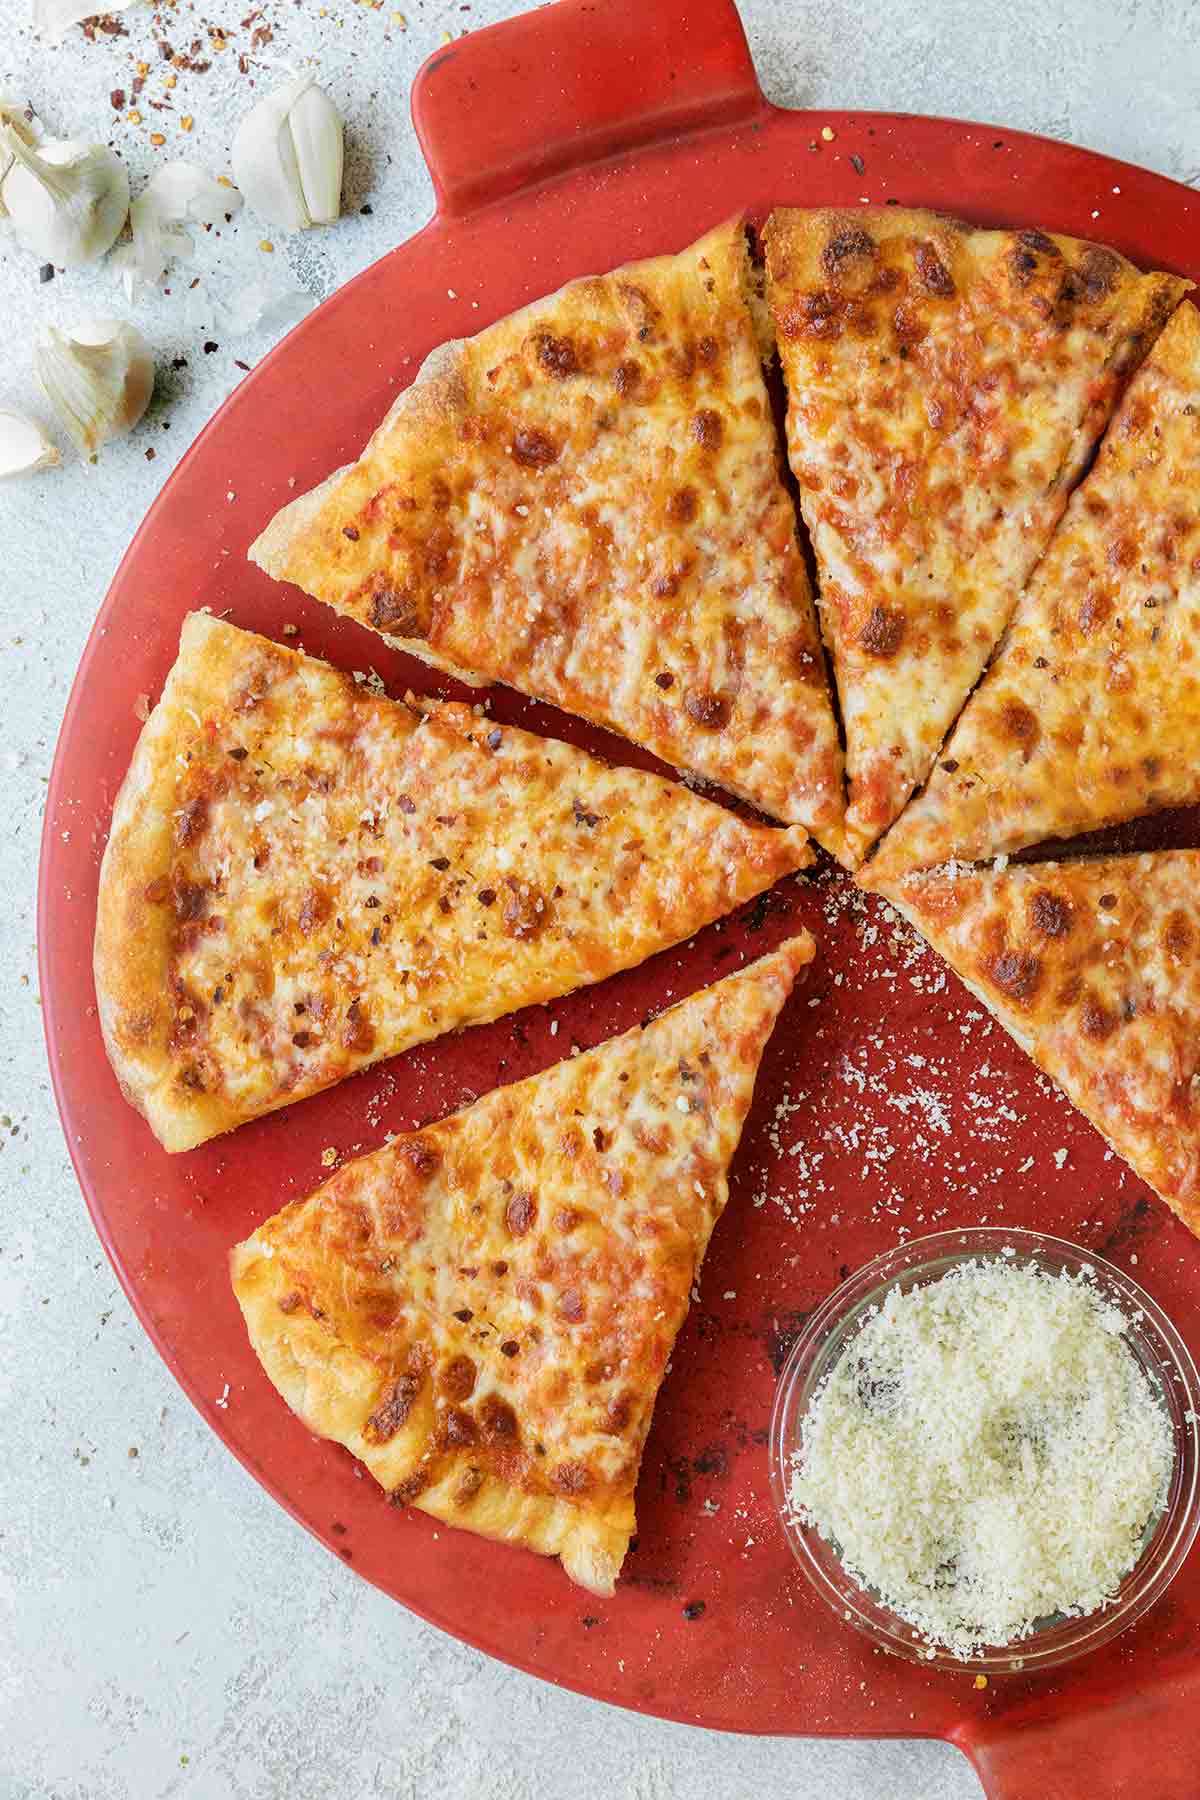 A New York style pizza cut into 8 slices with one slice missing and a bowl of Parmesan cheese on a red pizza plate.